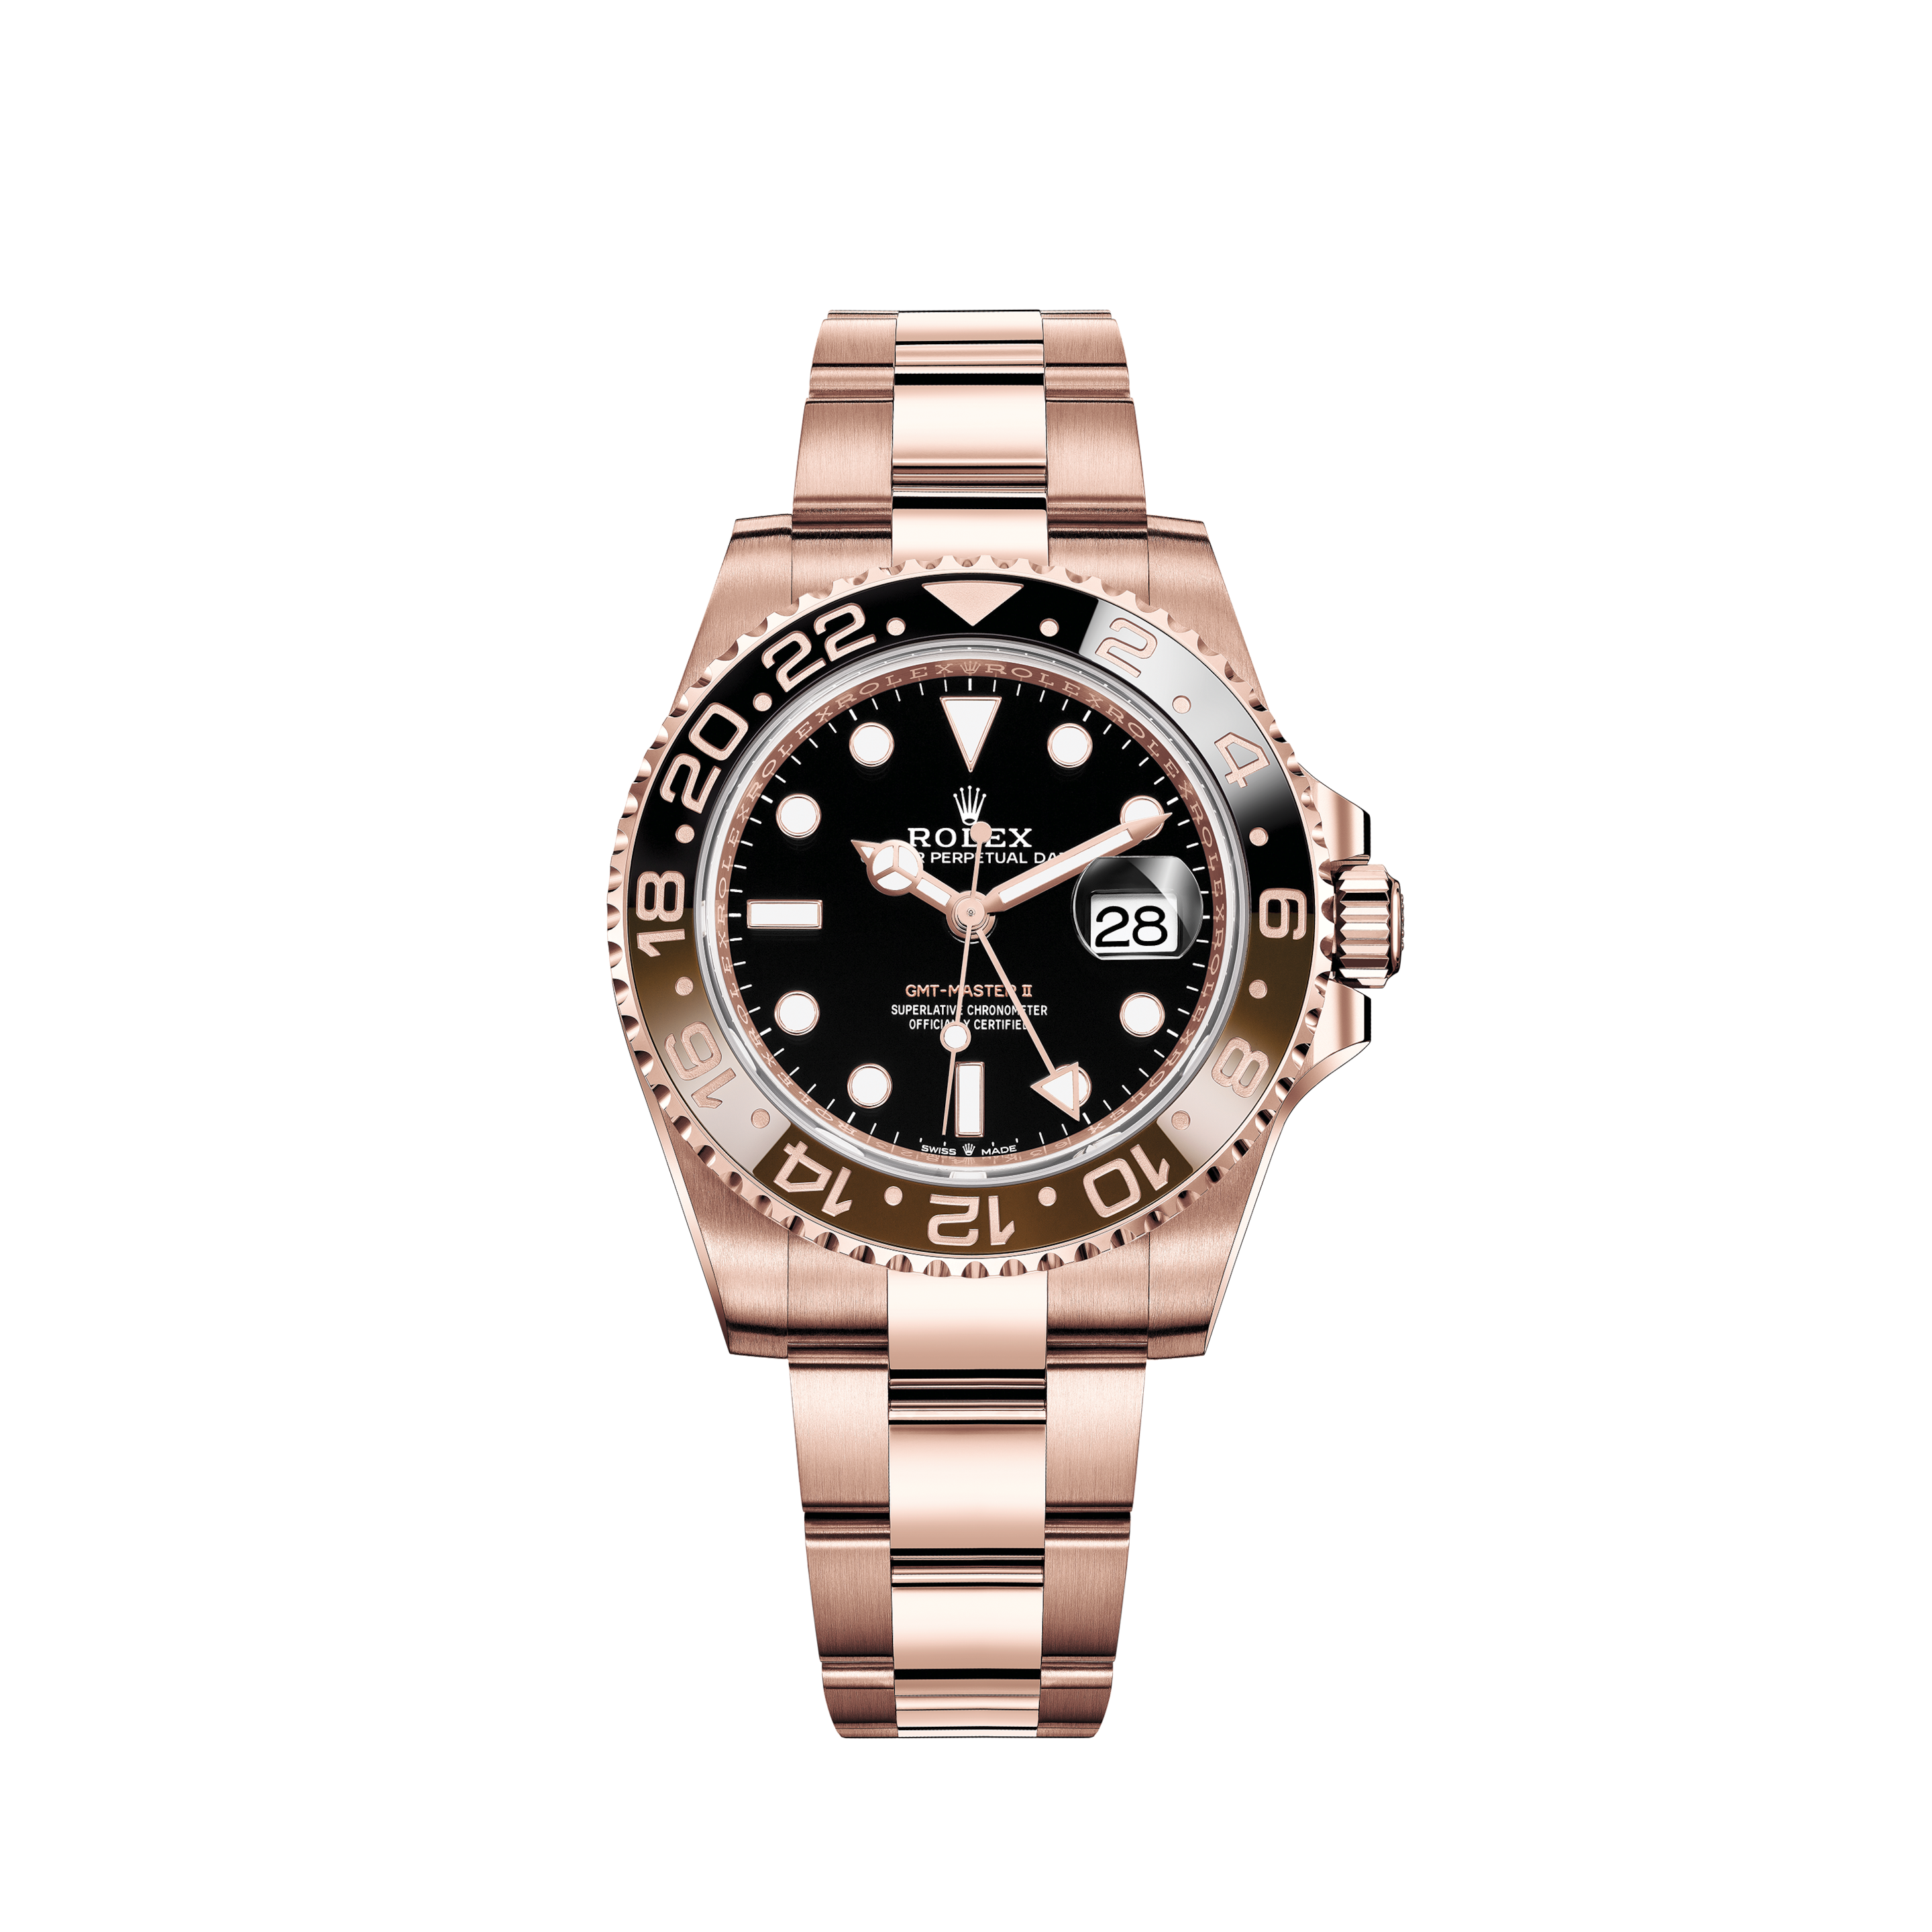 Rolex Datejust 31mm Stainless Steel and Yellow Gold 278383rbr MOP Diamond OysterRolex Datejust 31mm Stainless Steel and Yellow Gold 278383rbr Silver Diamond Jubilee